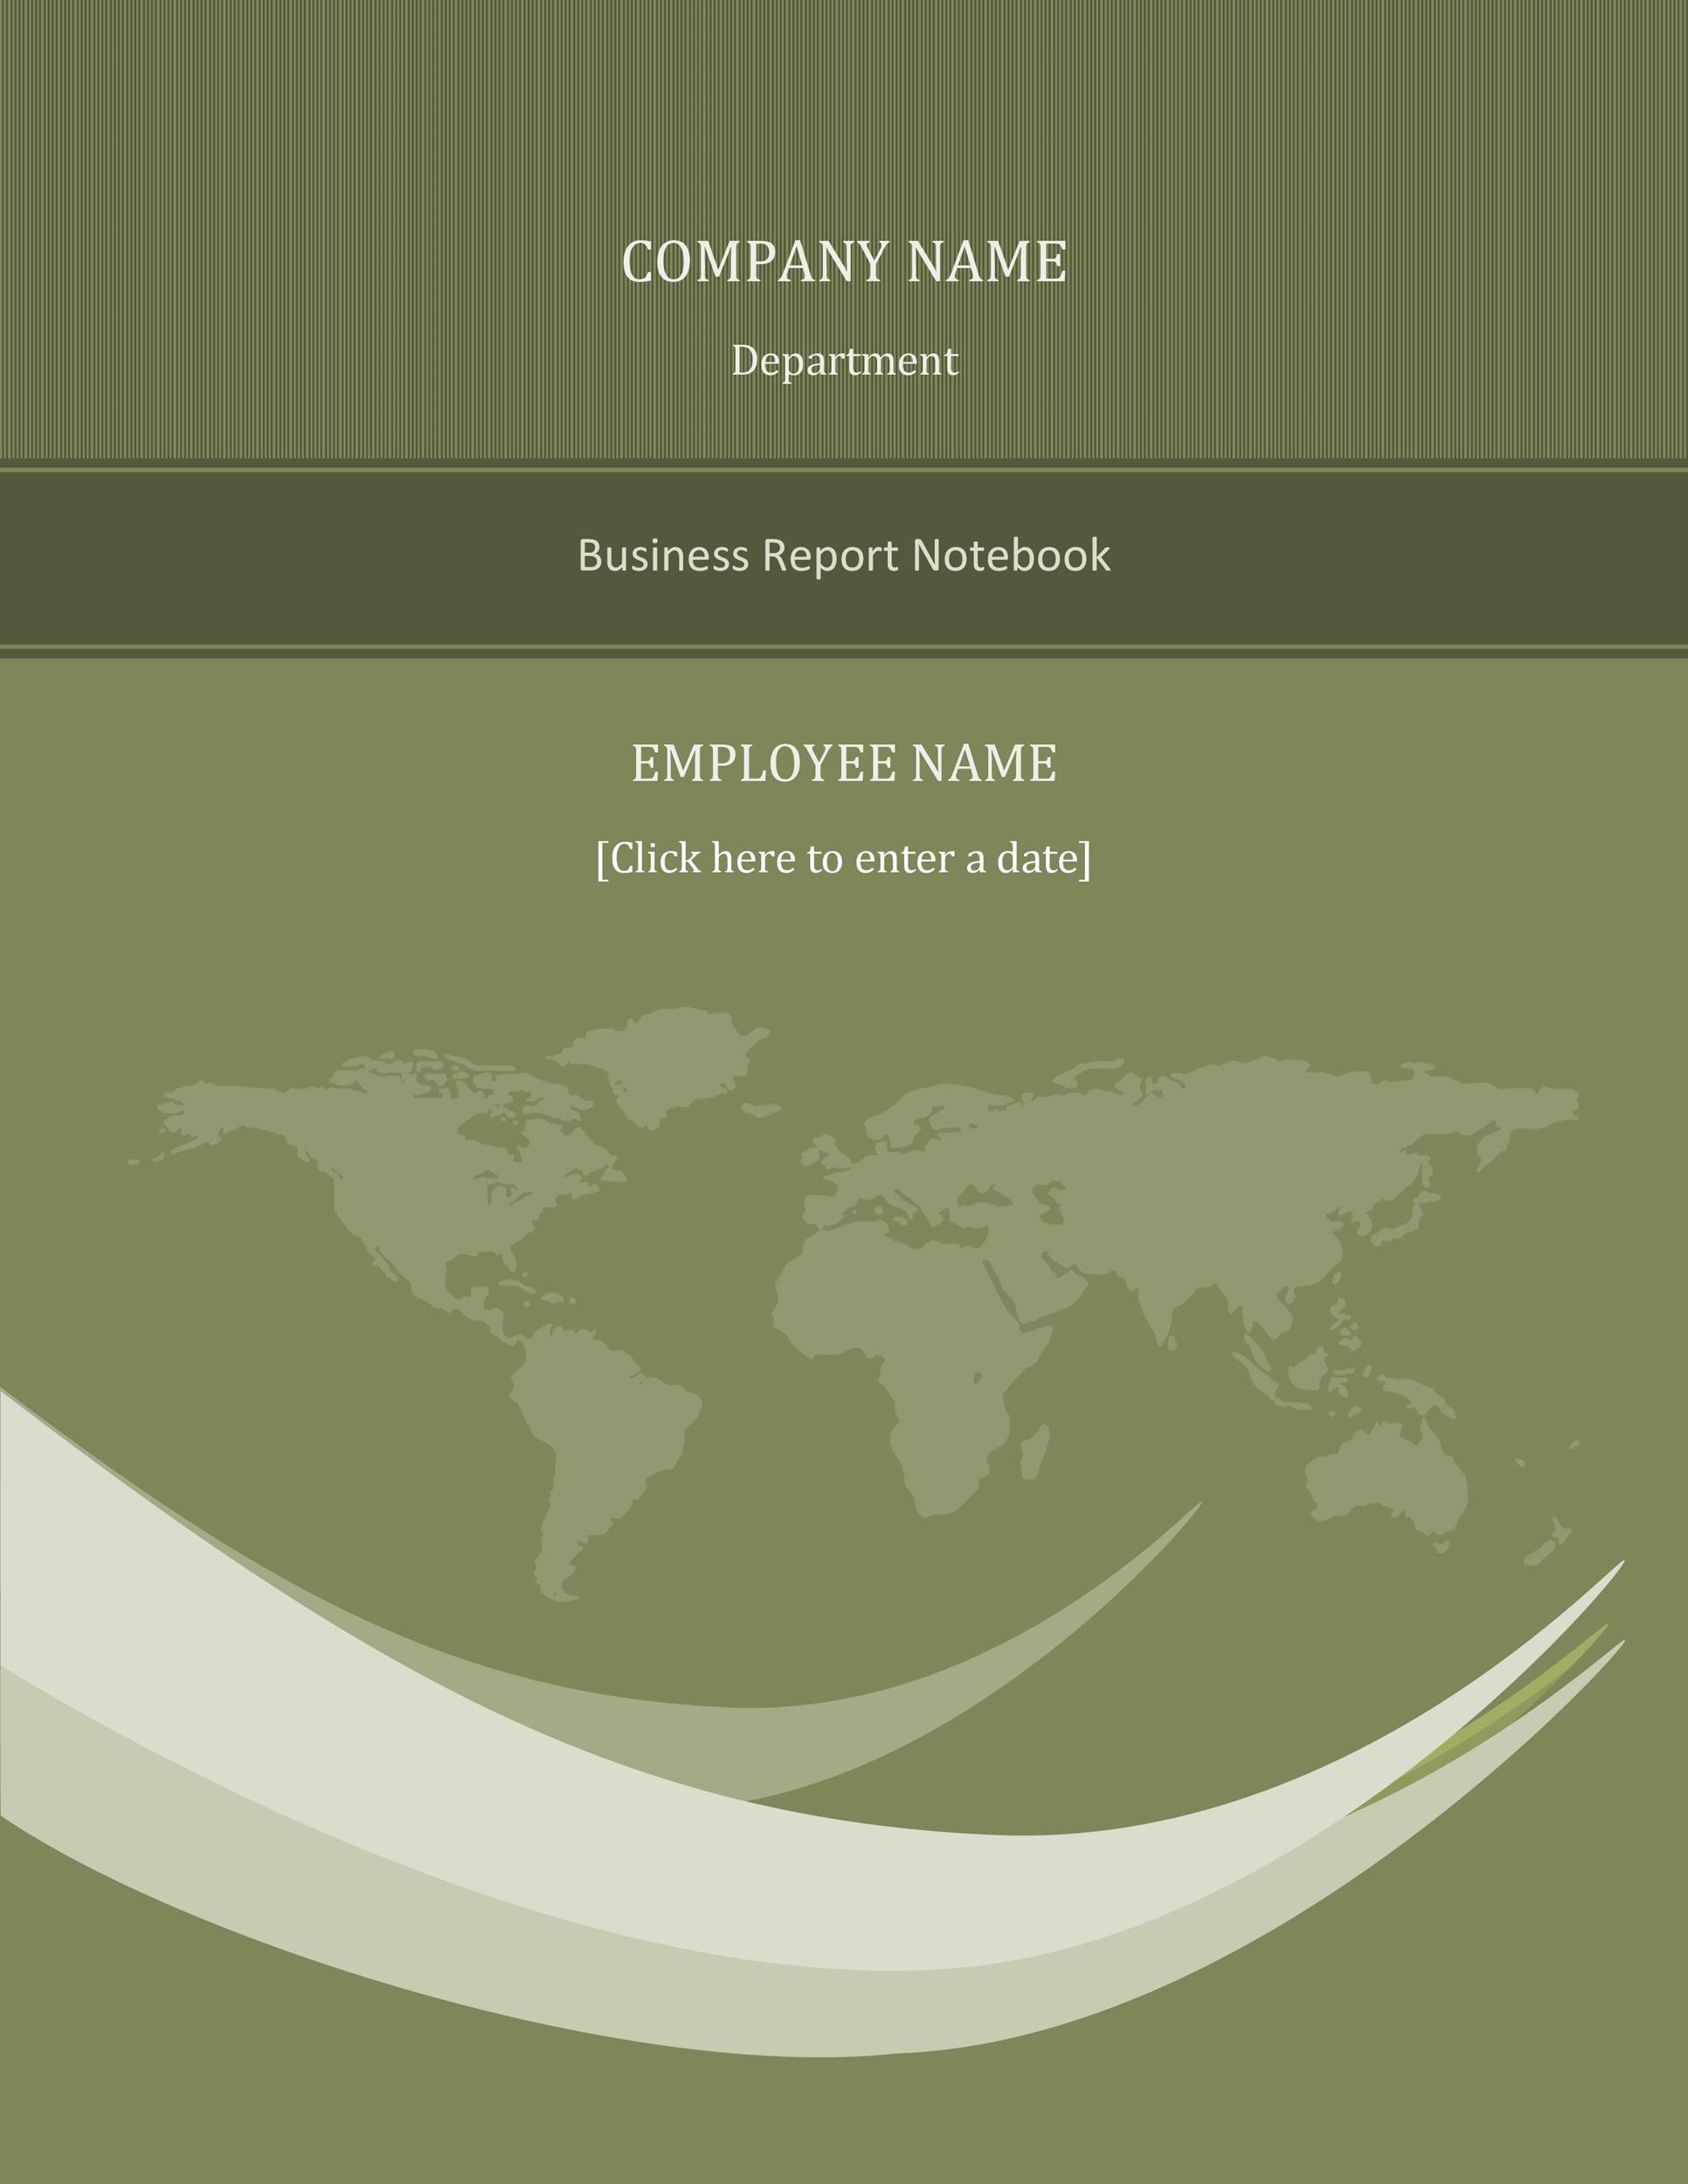 Free business report template 16